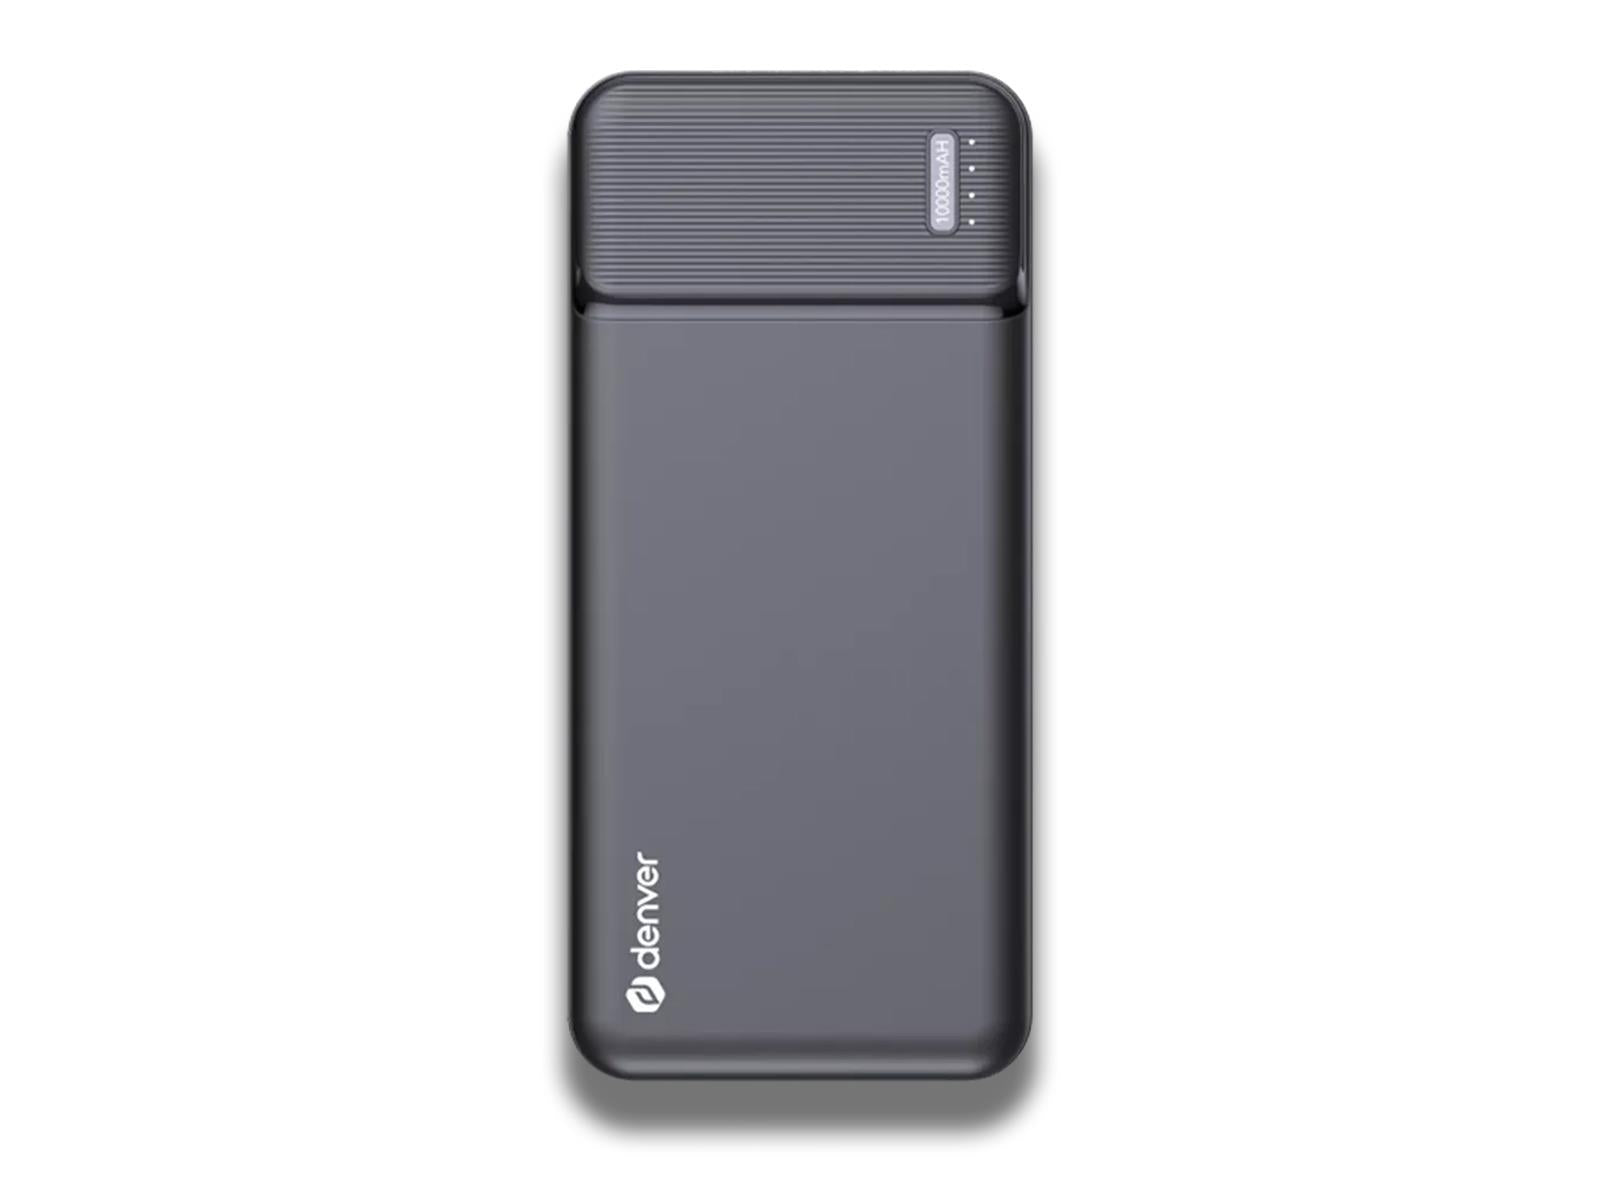 Denver High Capacity Portable Charger 10,000mAh Front View